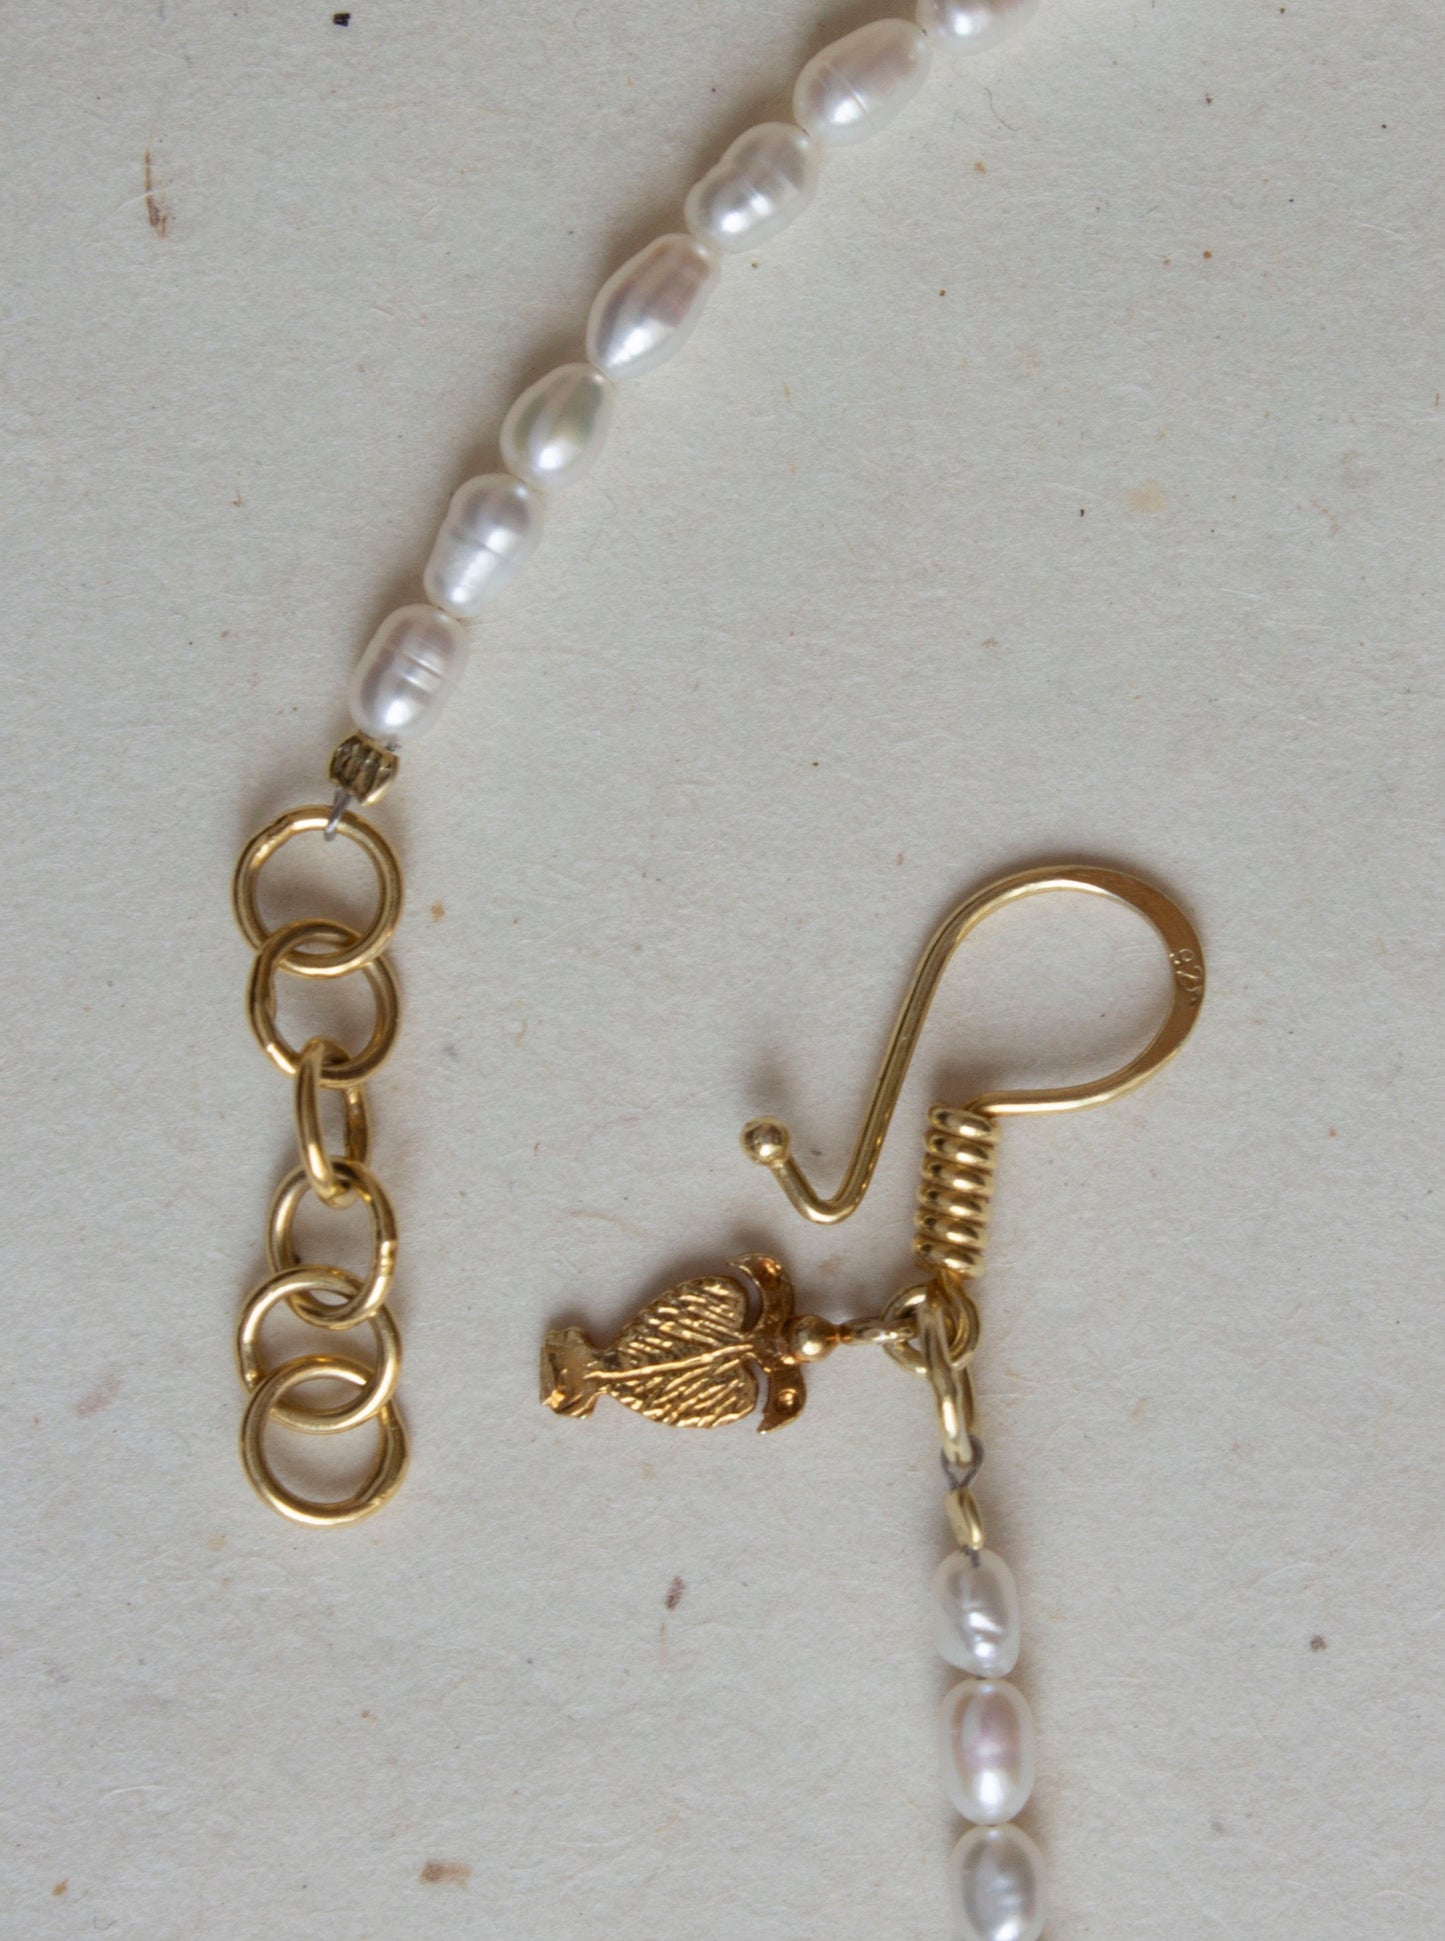 Roman hook closing details with pearls